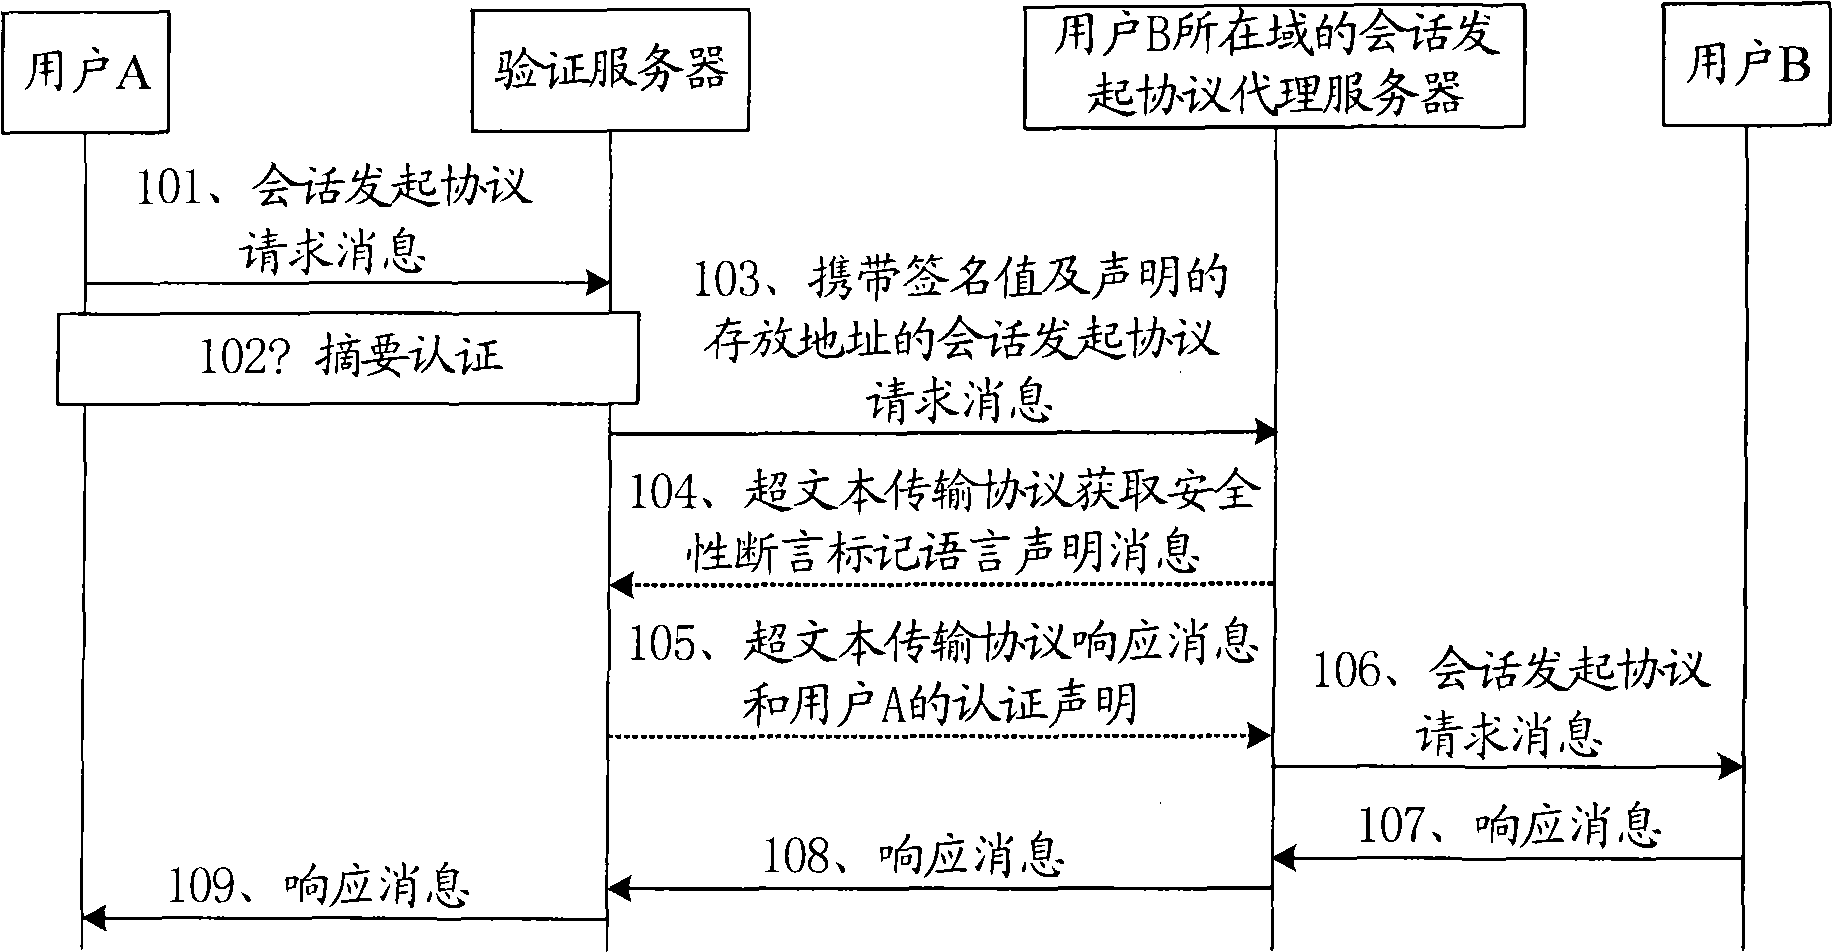 Session initiation protocol registry method, certification and authorization method, system and equipment